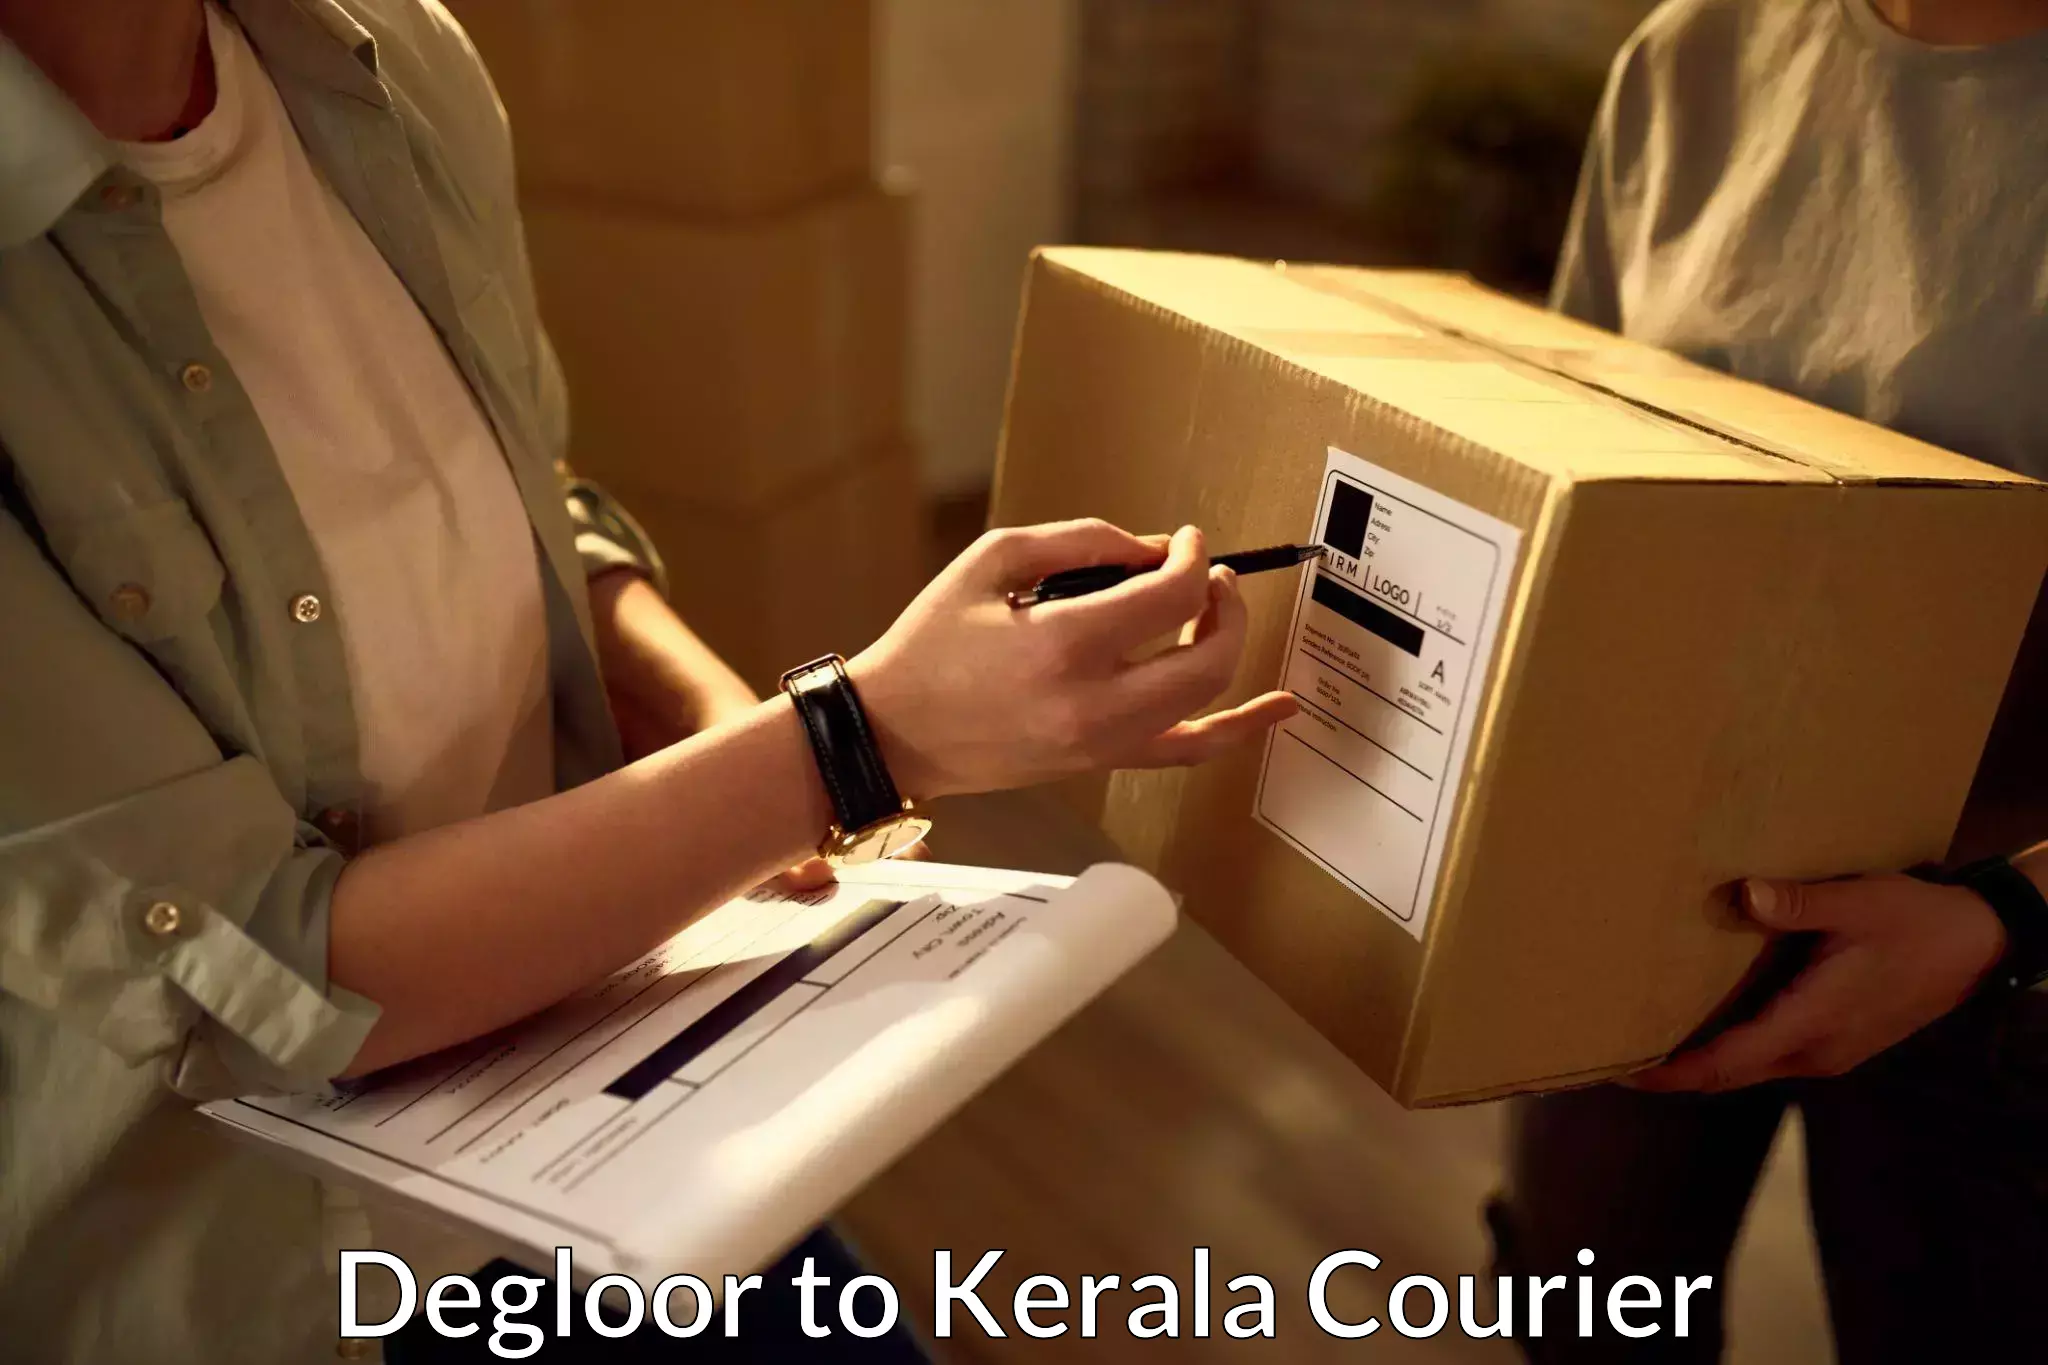 Urban courier service Degloor to Calicut